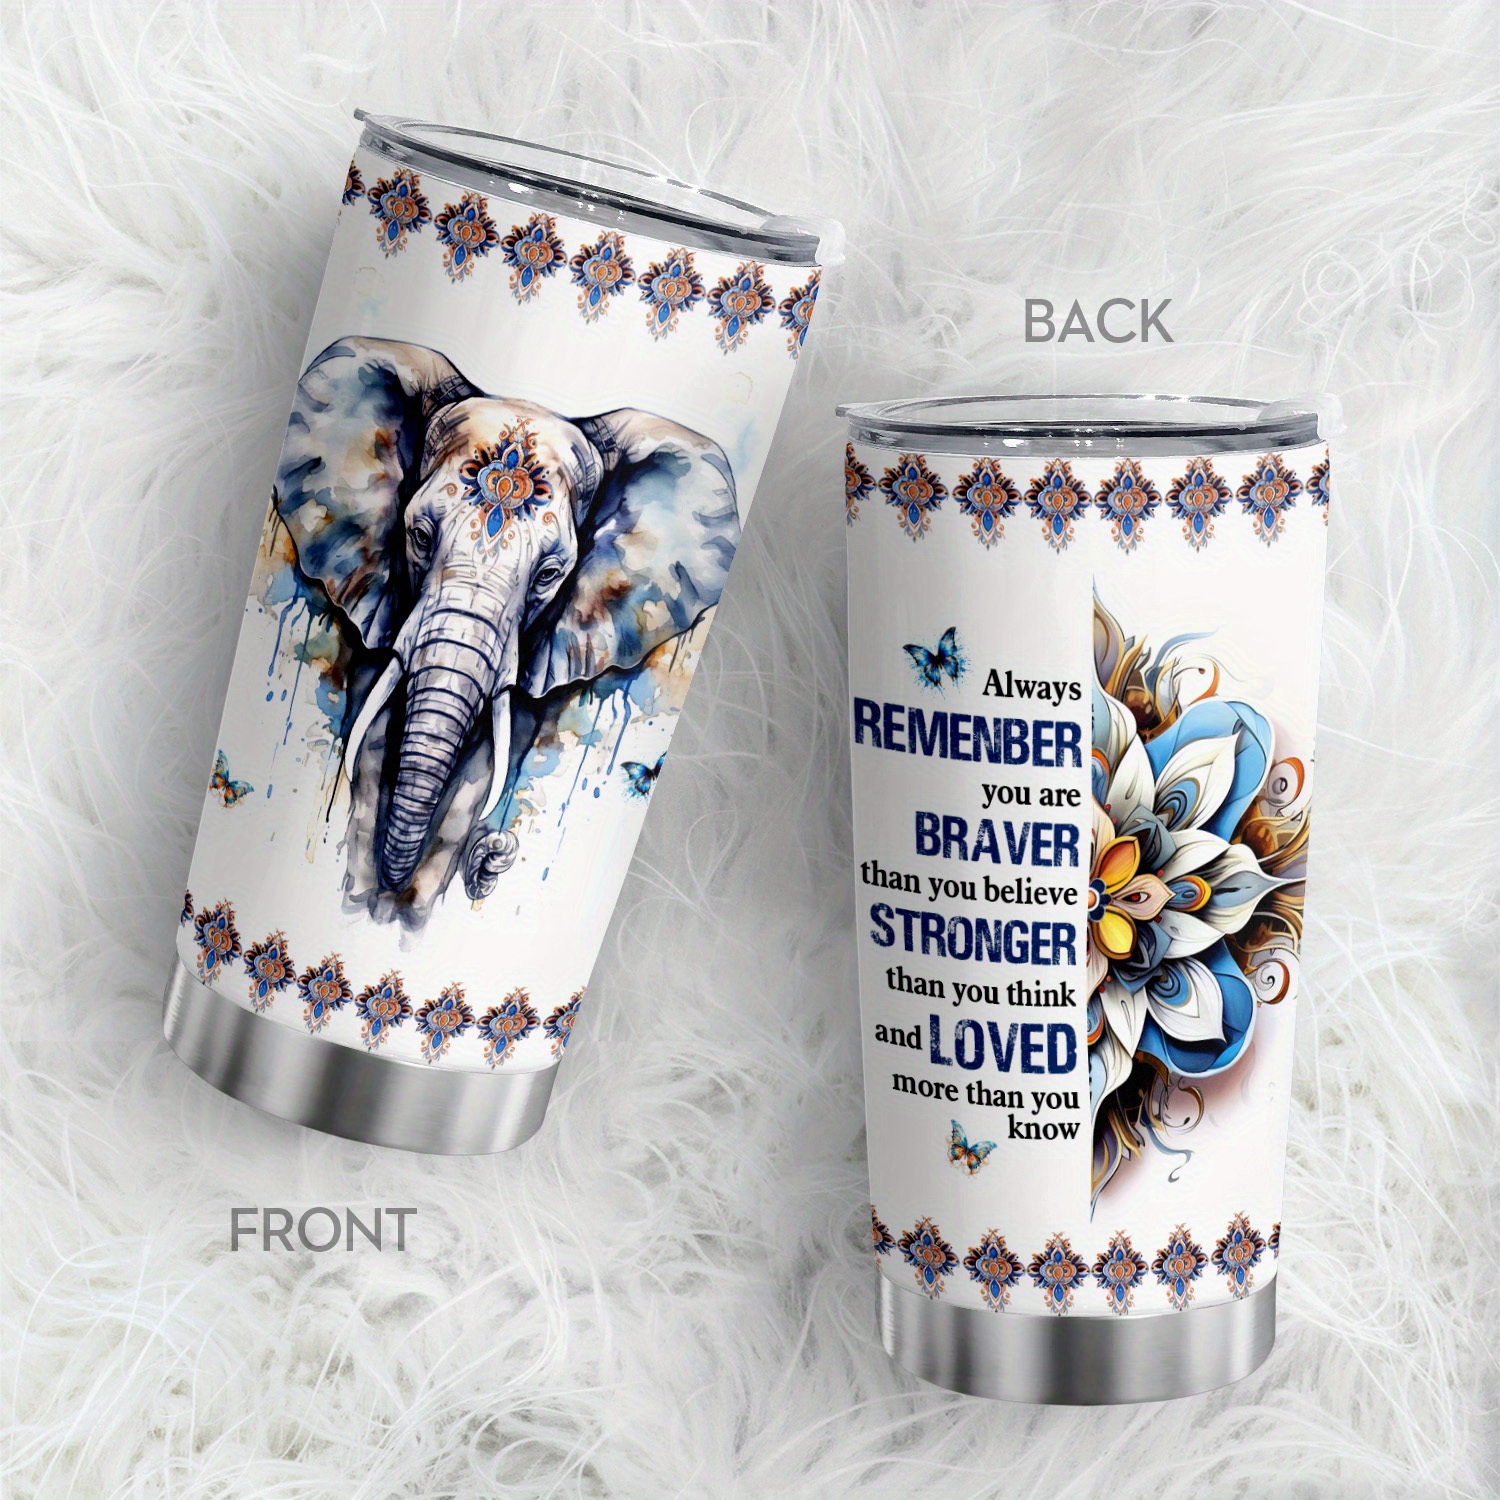 

1pc 20oz Birthday Gifts Motivational Words, Tumbler Cup With Lid, Insulated Travel Coffee Mug With Elephant Print, For Ice Drink, Hot Beverage